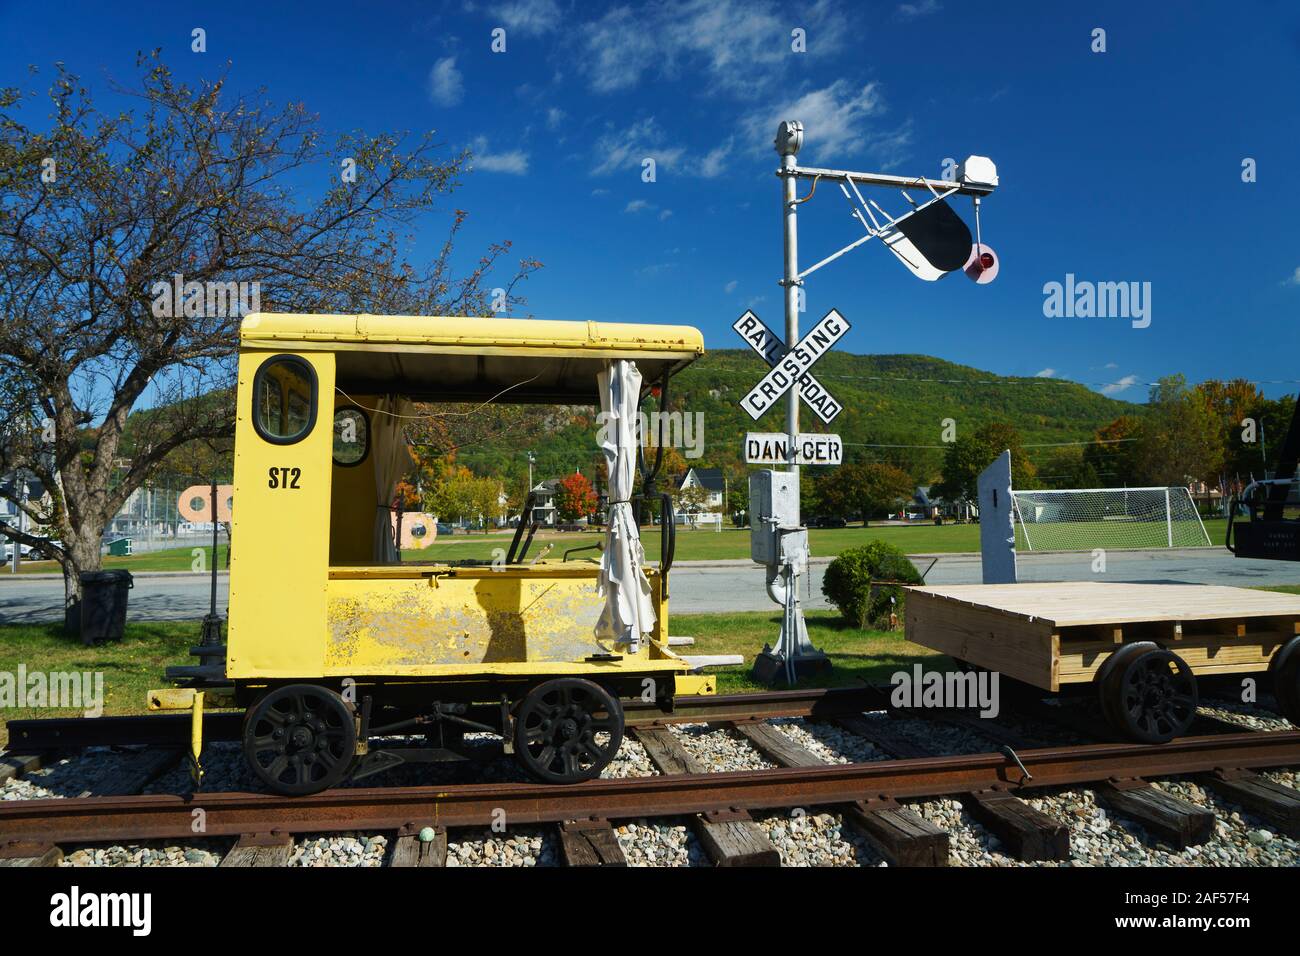 Vintage draisine displayed at Gorham Historical Society and Railroad Museum, New Hampshire, USA. Stock Photo